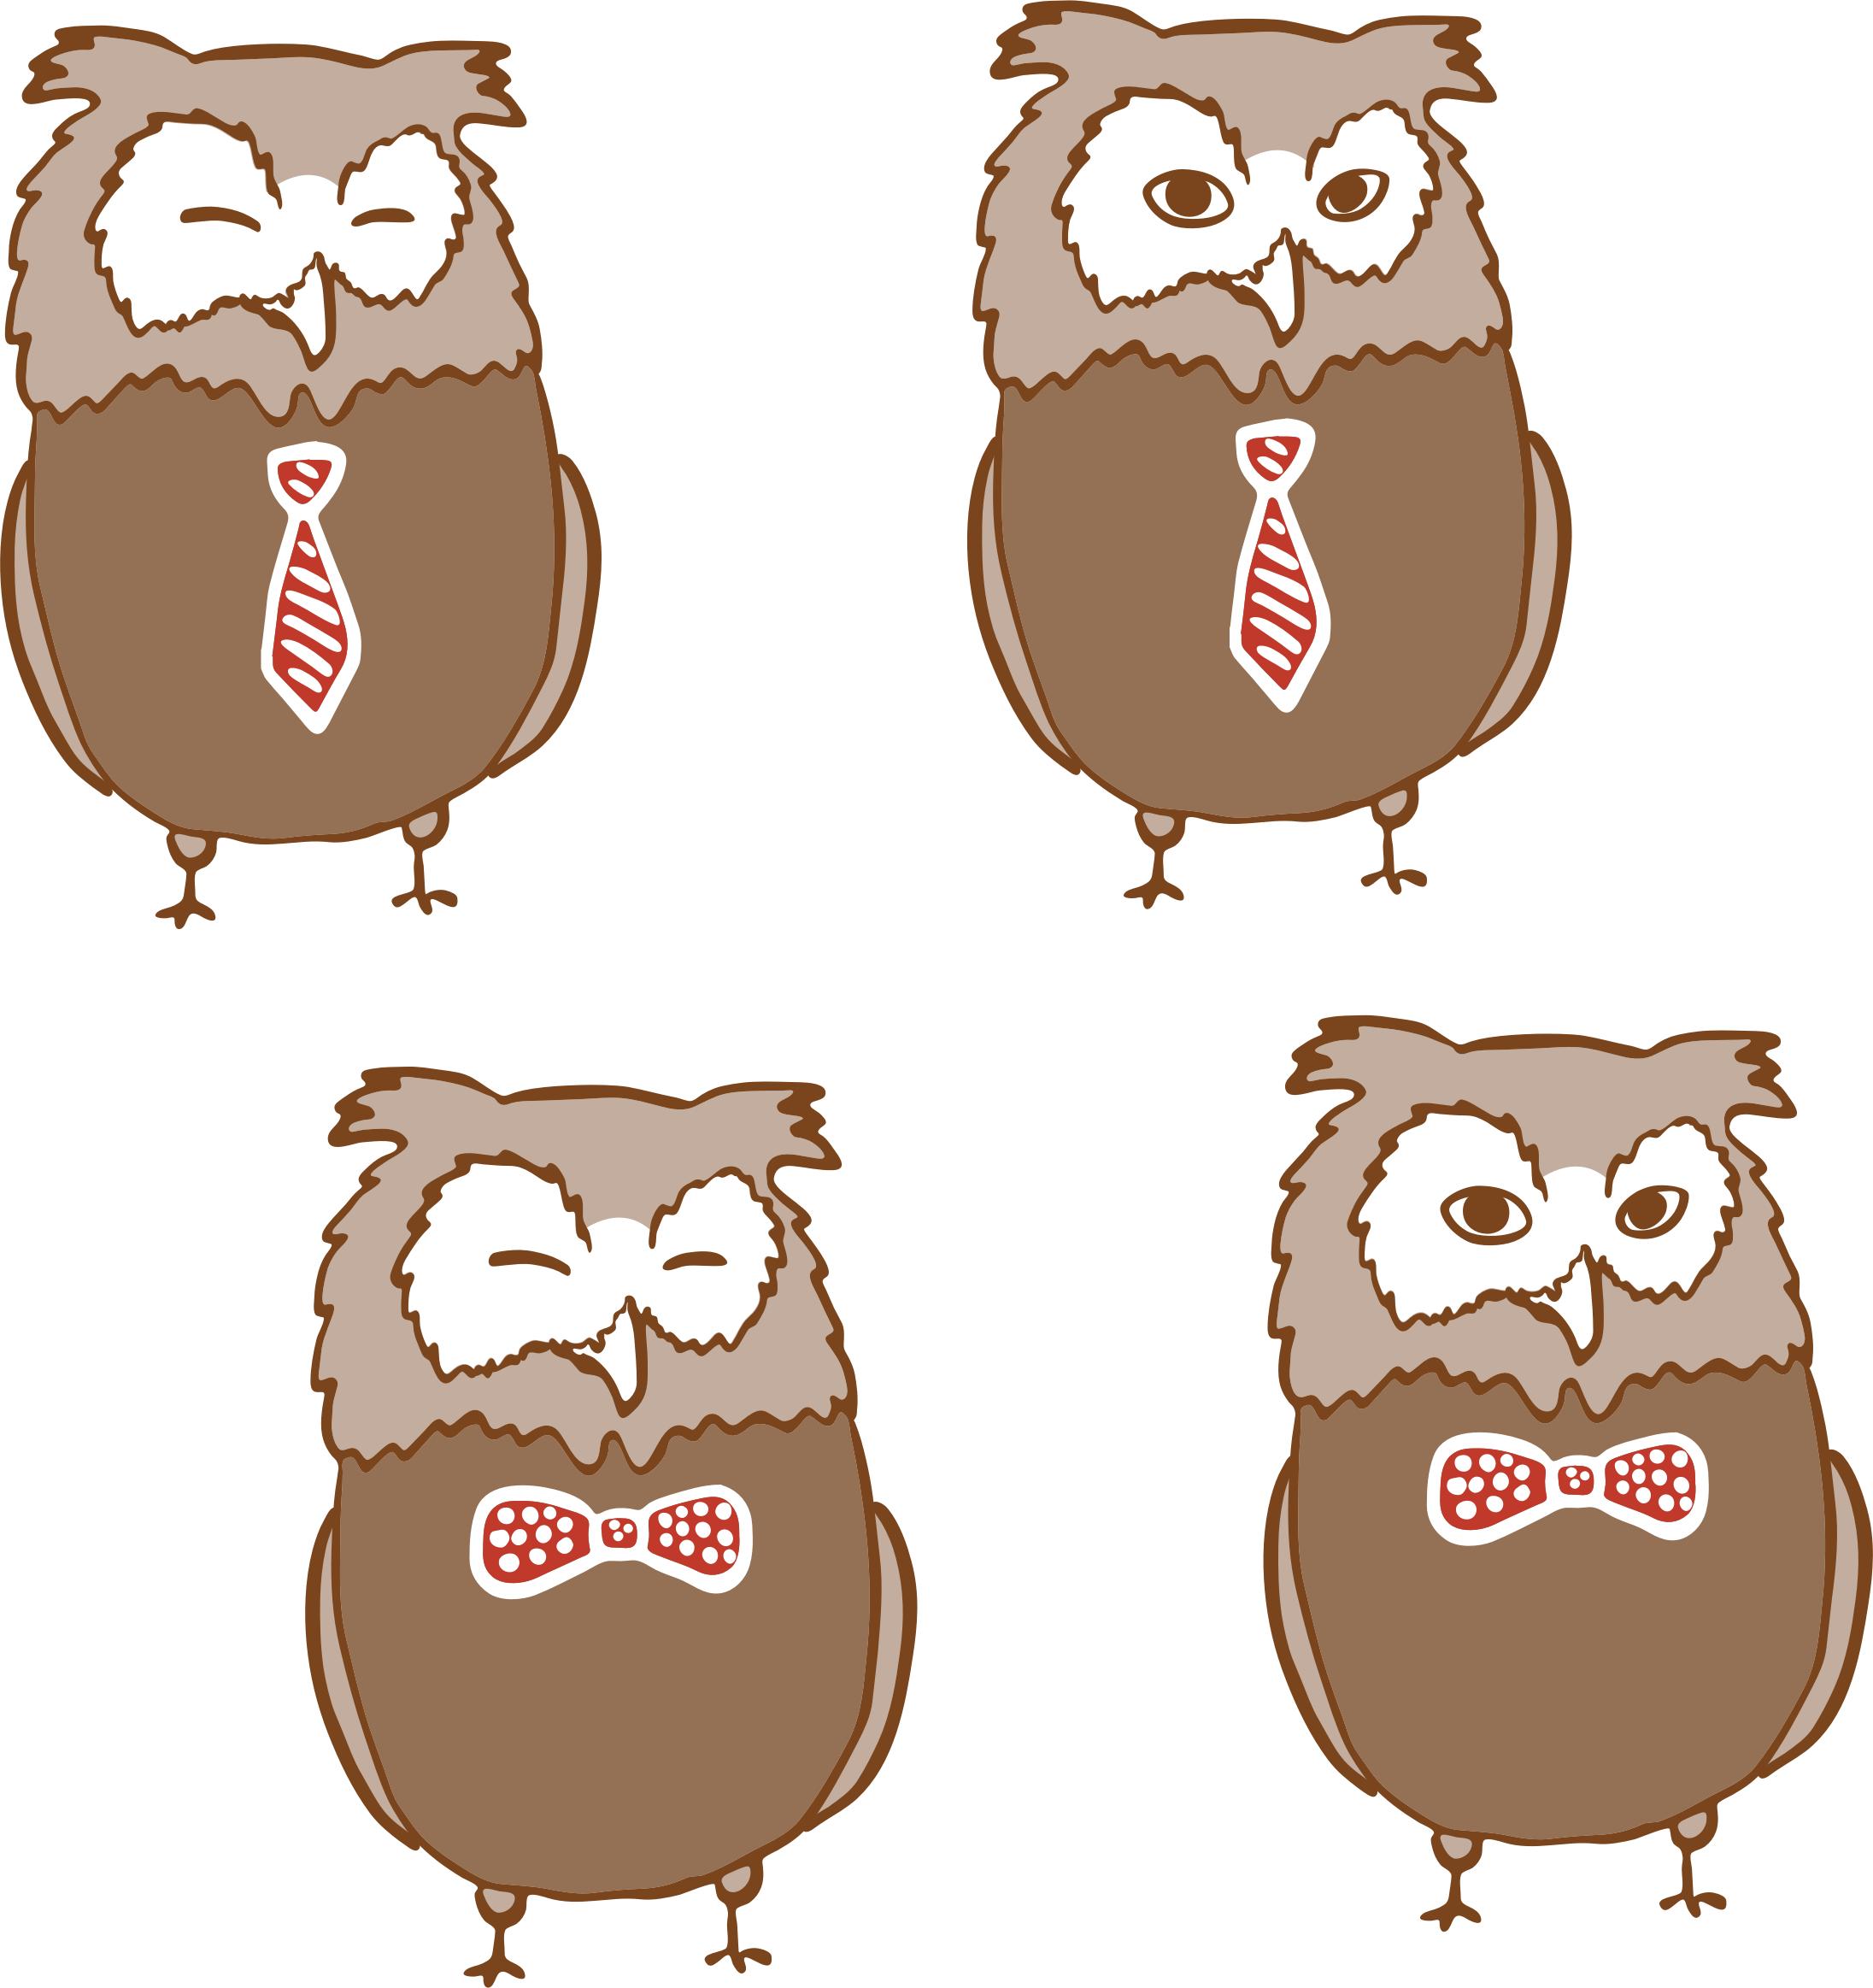 Anthropomorphic Owls 4 png